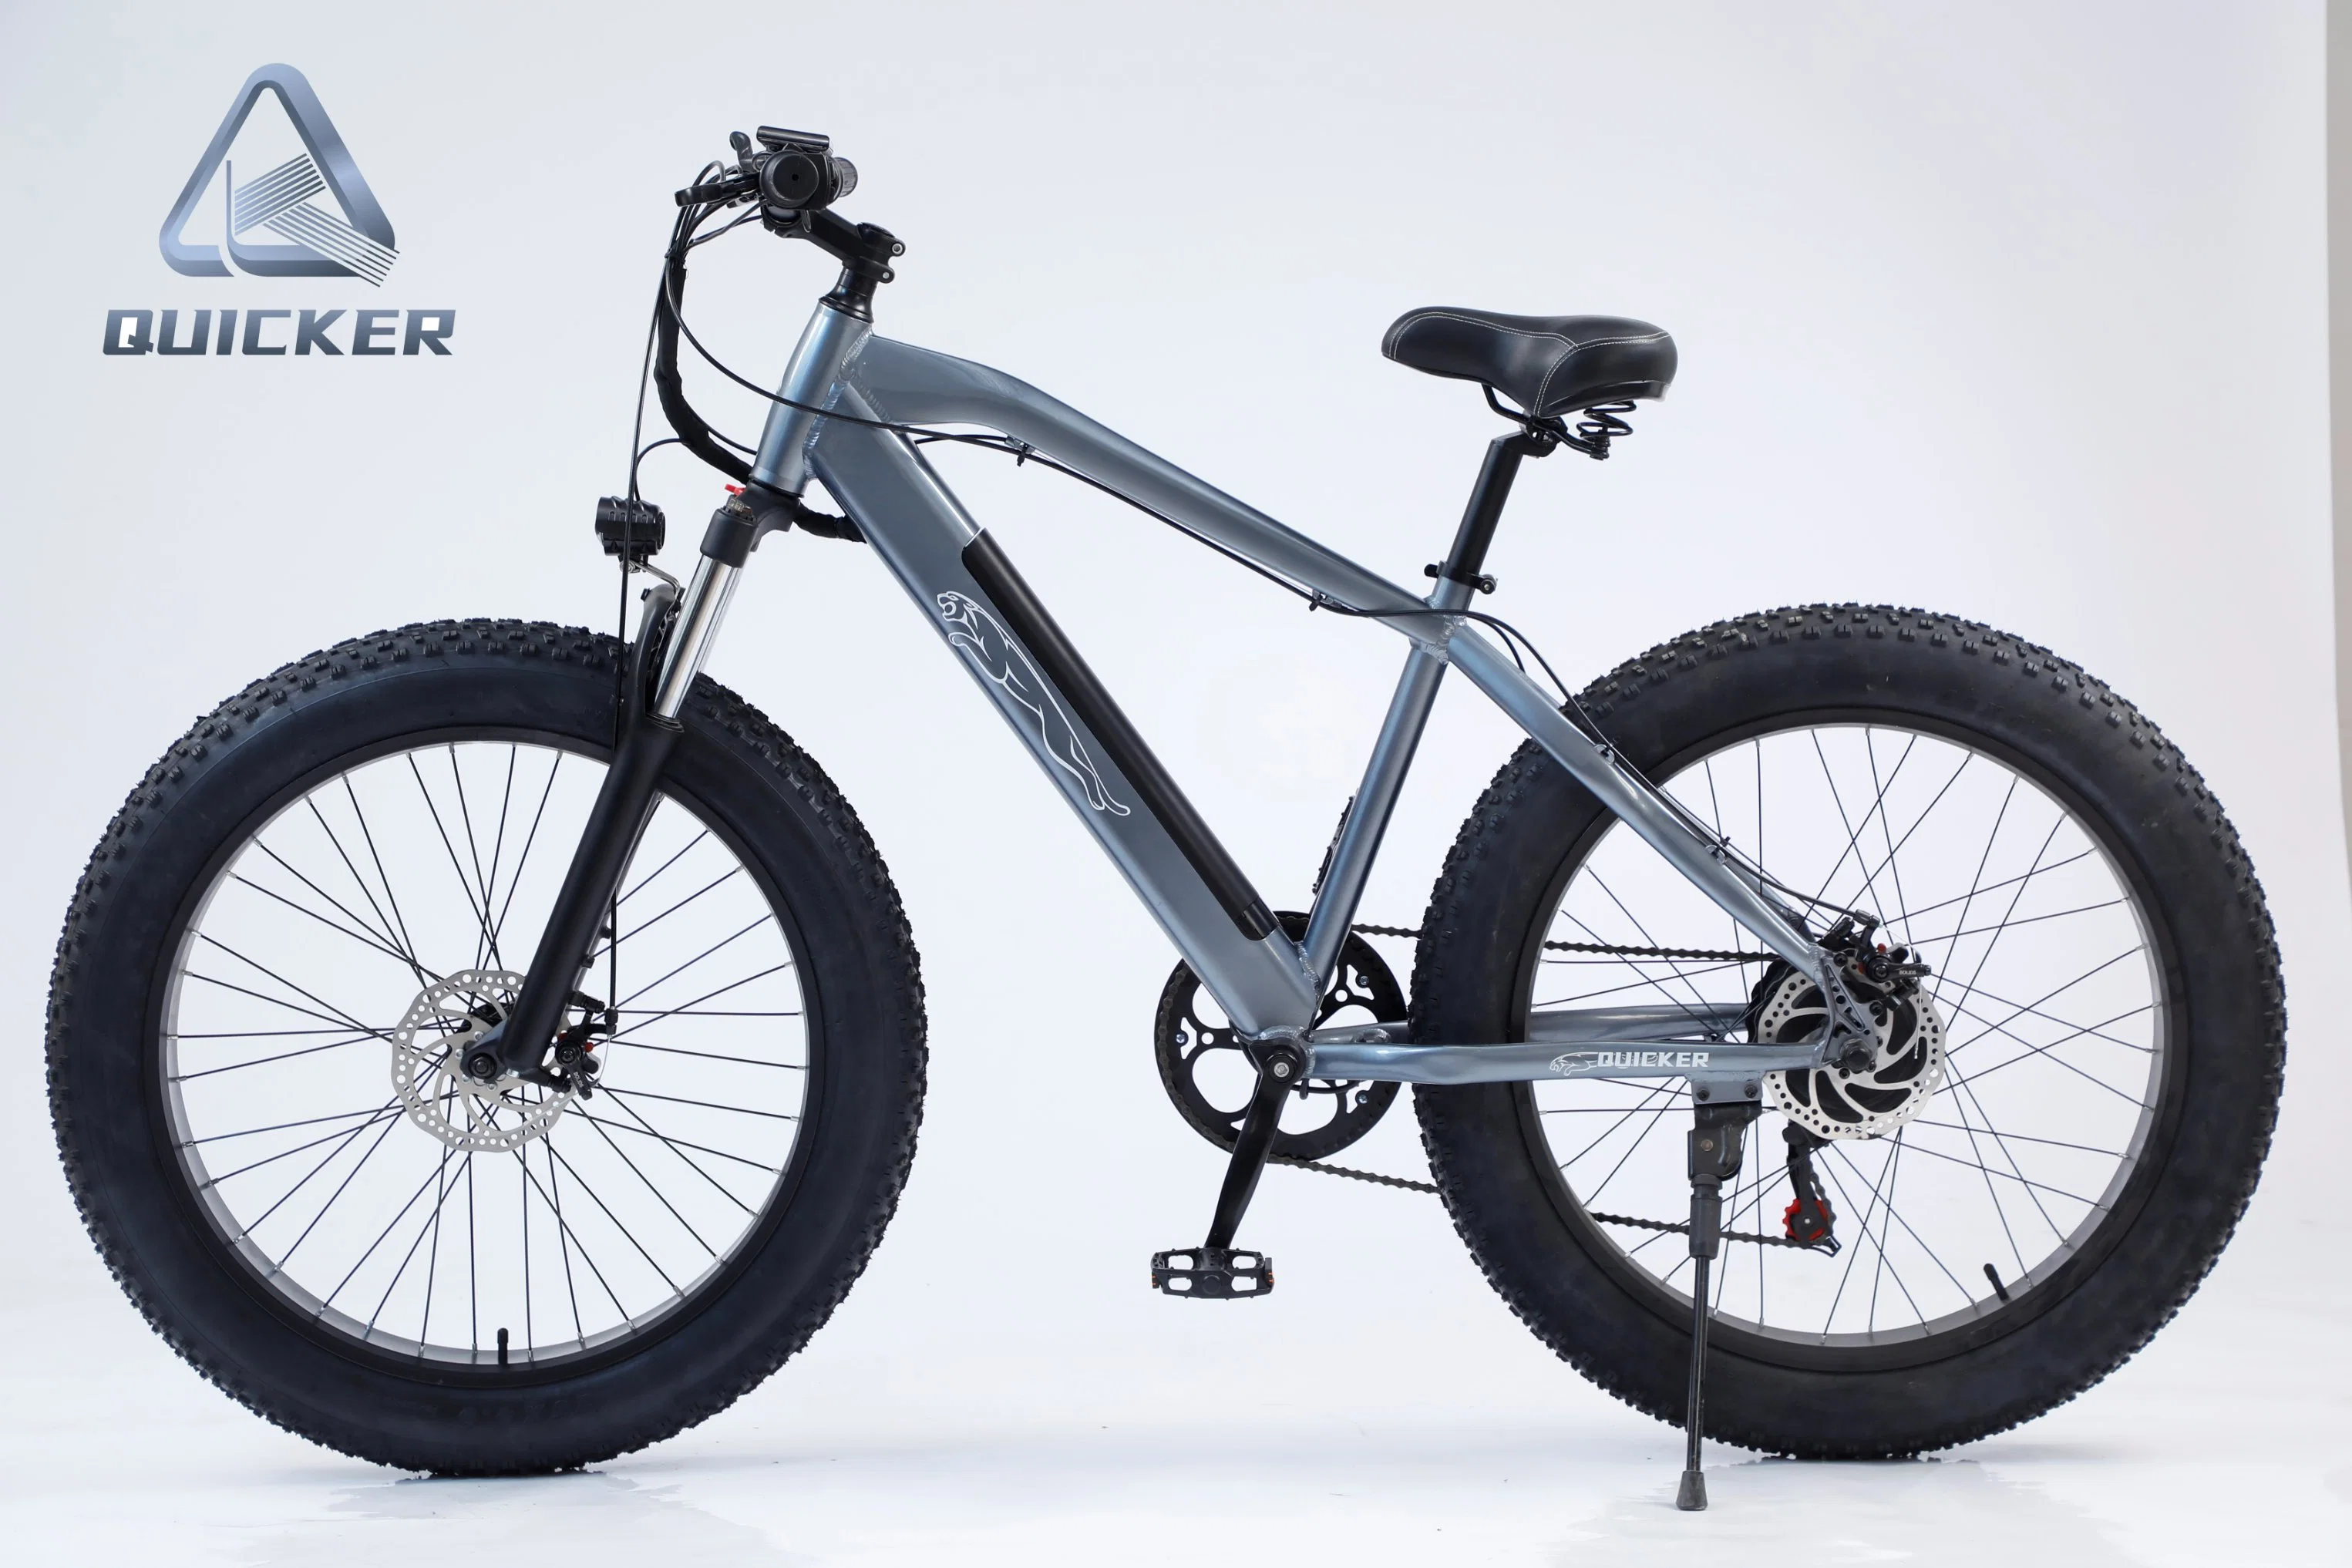 36V 250W Pedal Assist E Power Battery Cycle 48V 350W Man Electric Mountain Bike 750W Adults Ebike Best Electric Bicycle for Sale